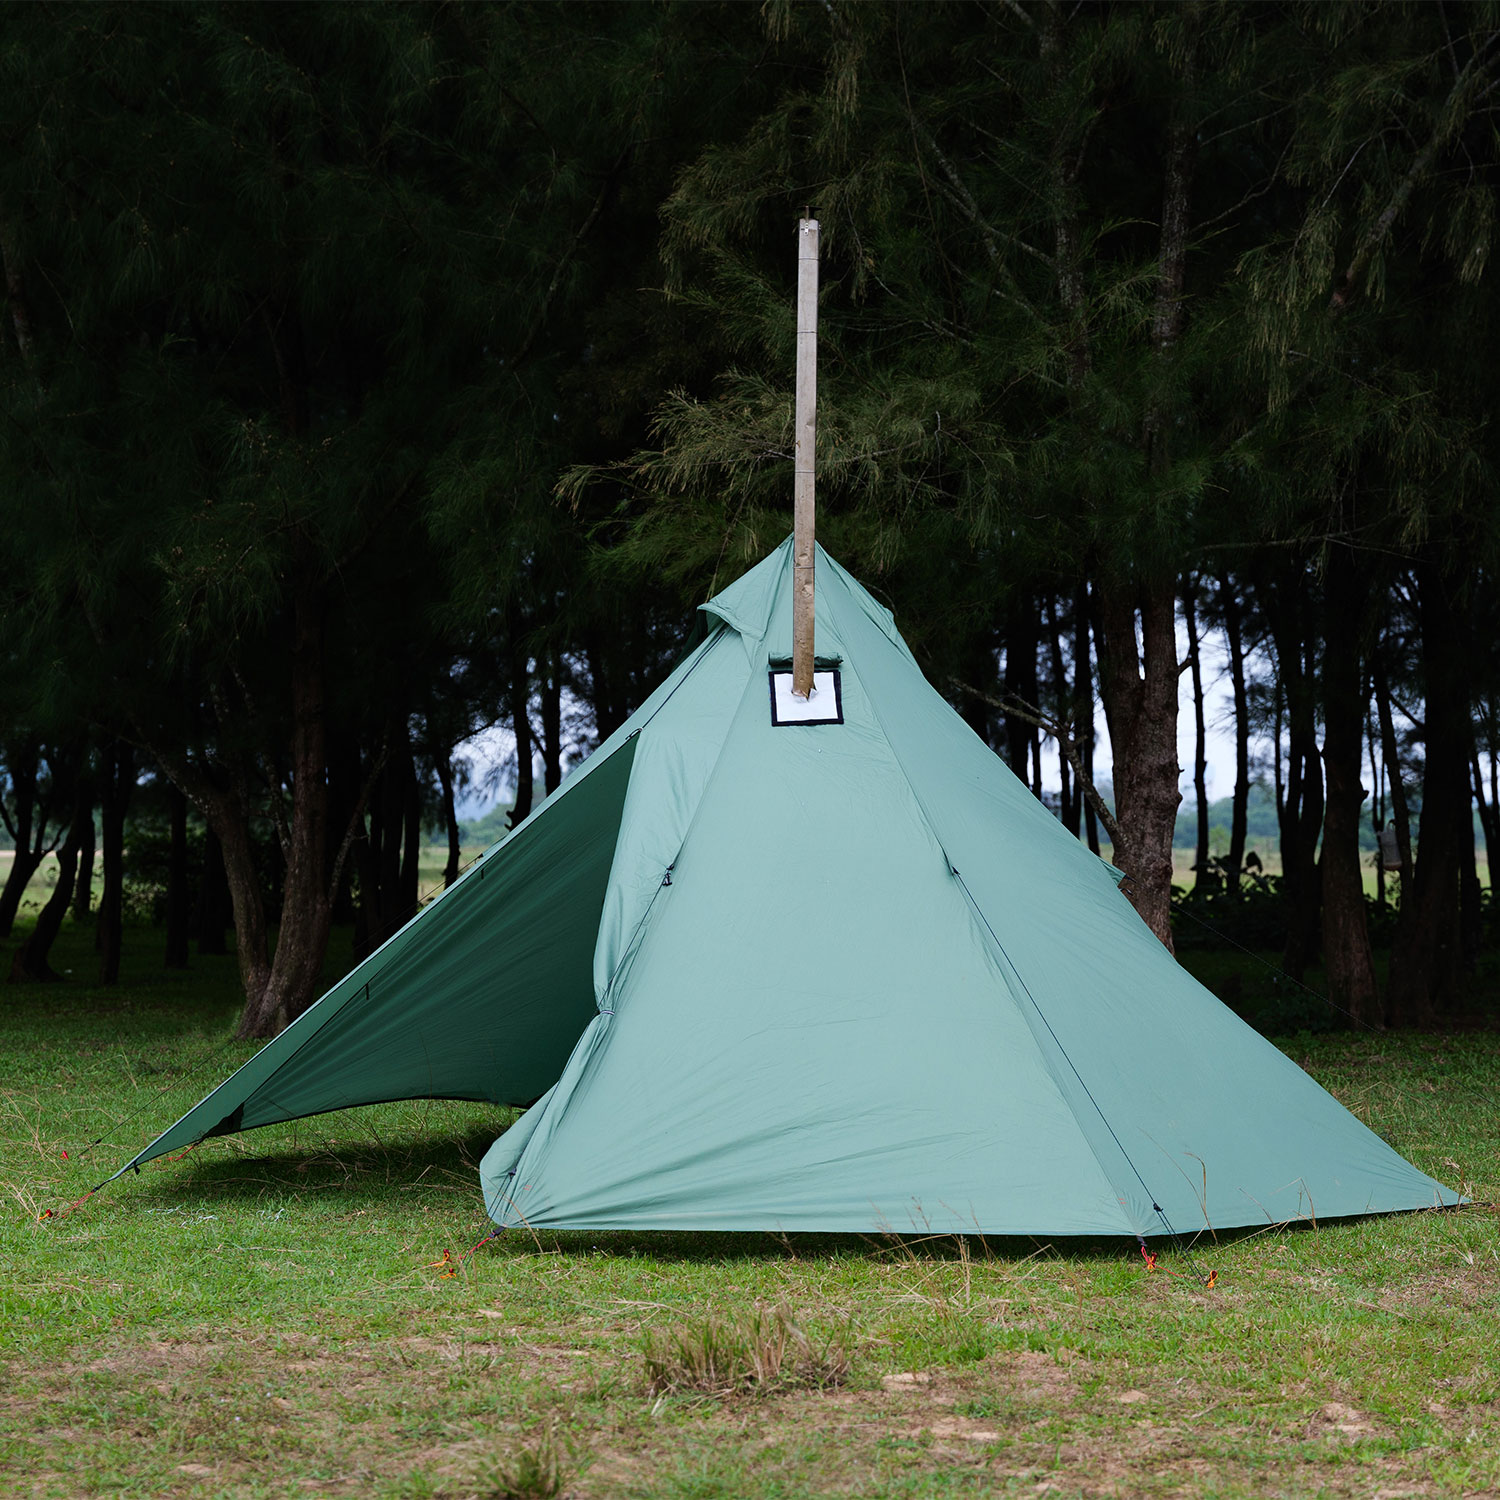 LT100 Lightweight Hot Tent | Tent with Stove for Hot Tent Camping | TiForest